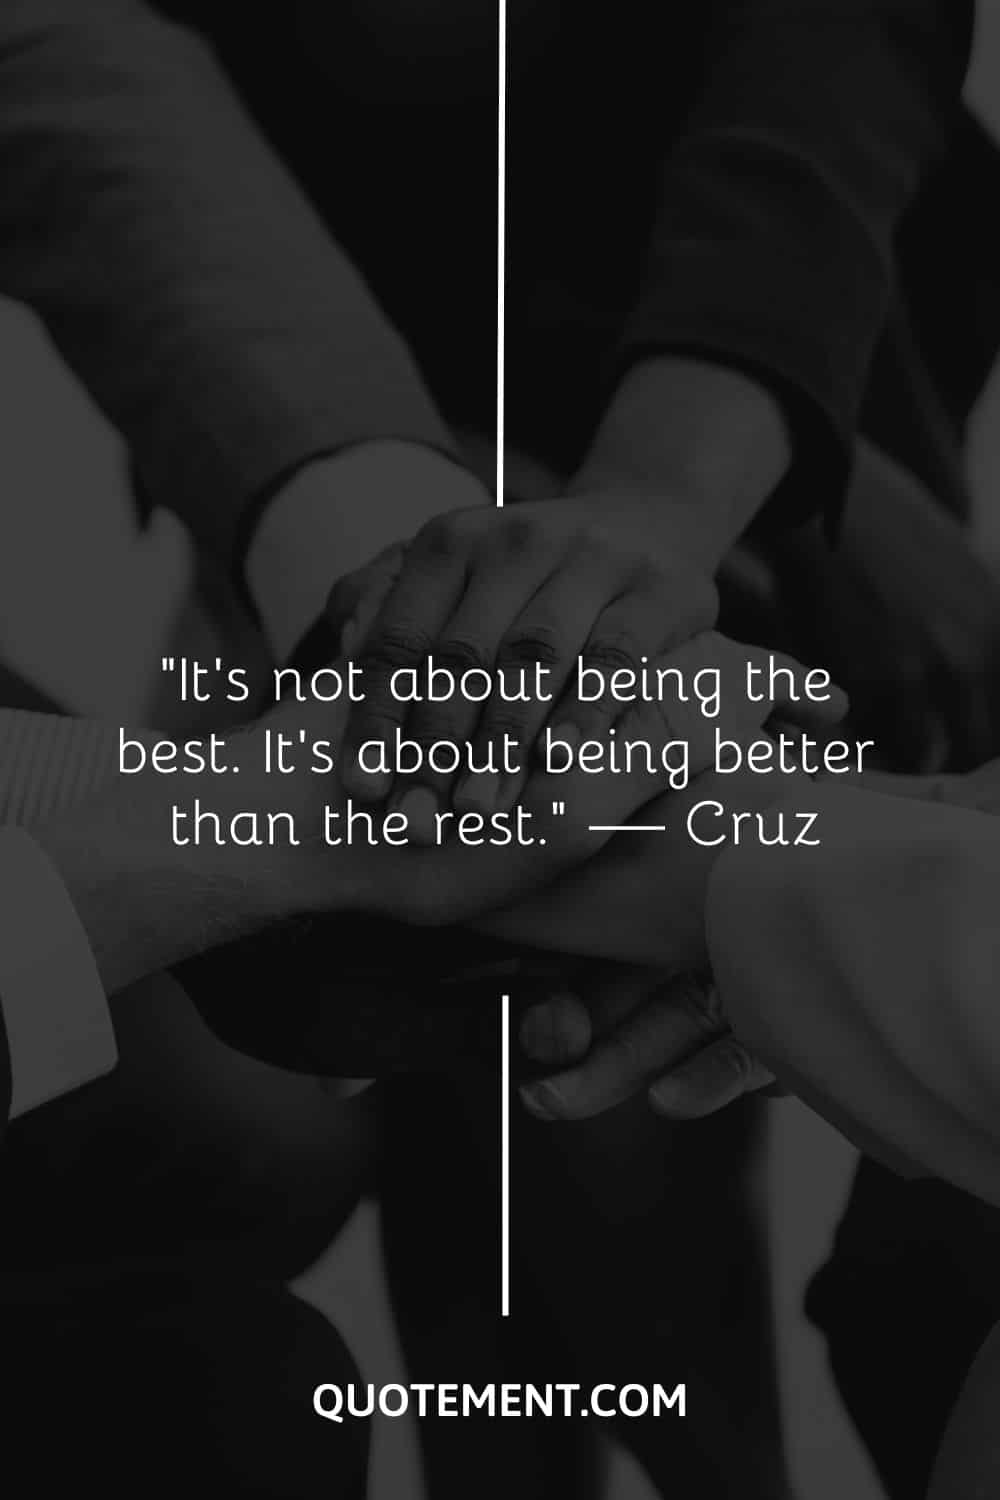 It’s not about being the best. It’s about being better than the rest